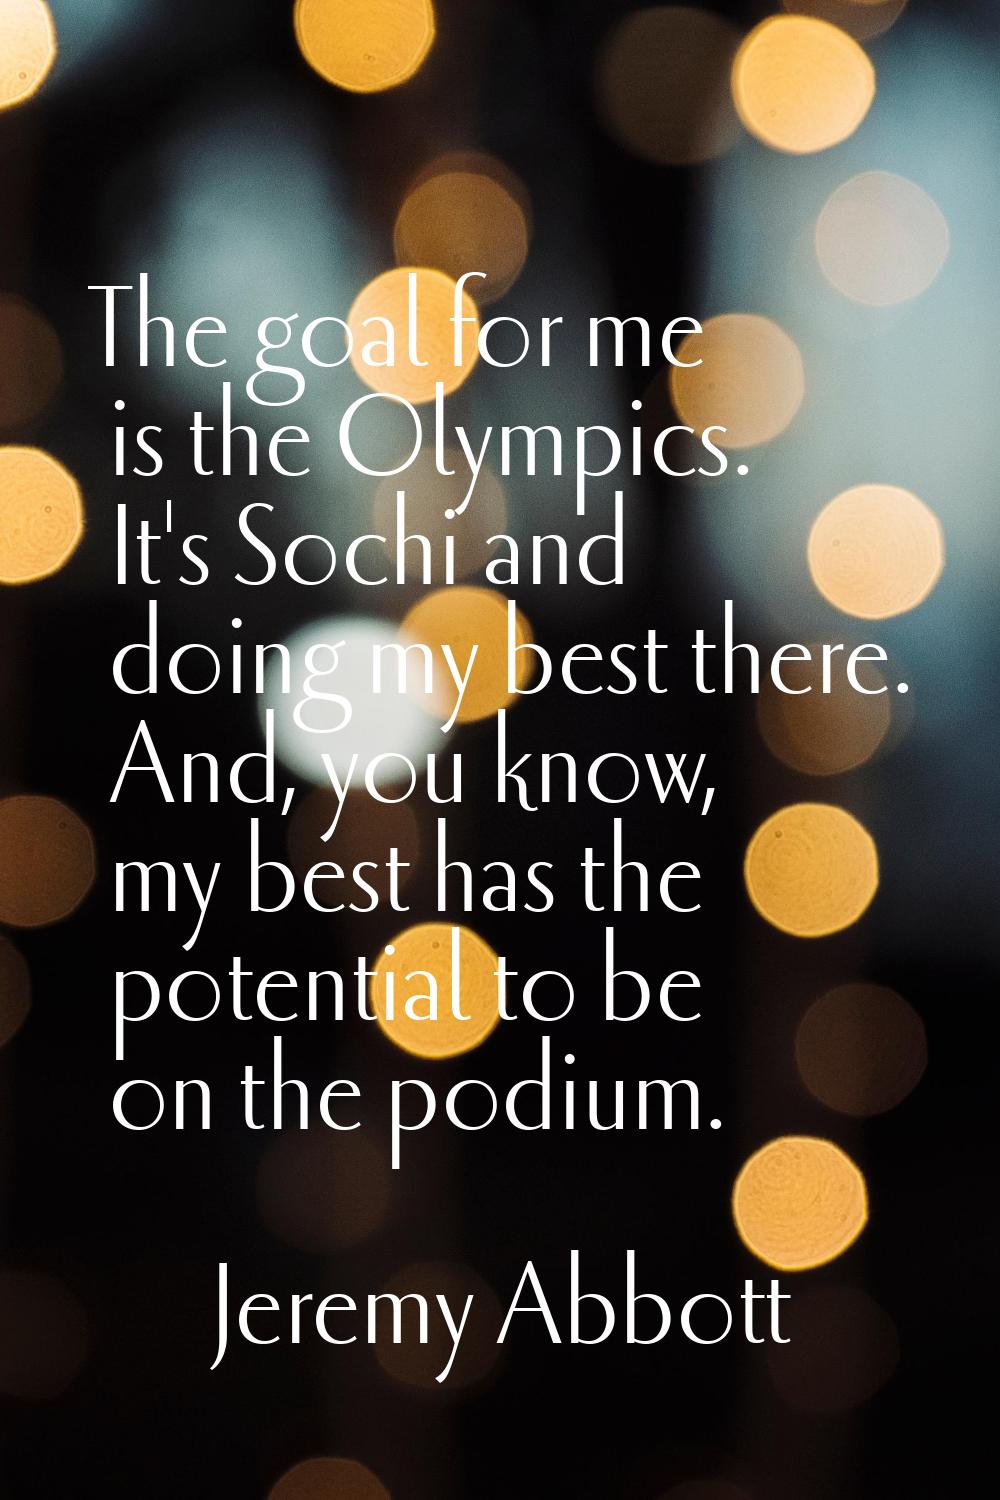 The goal for me is the Olympics. It's Sochi and doing my best there. And, you know, my best has the